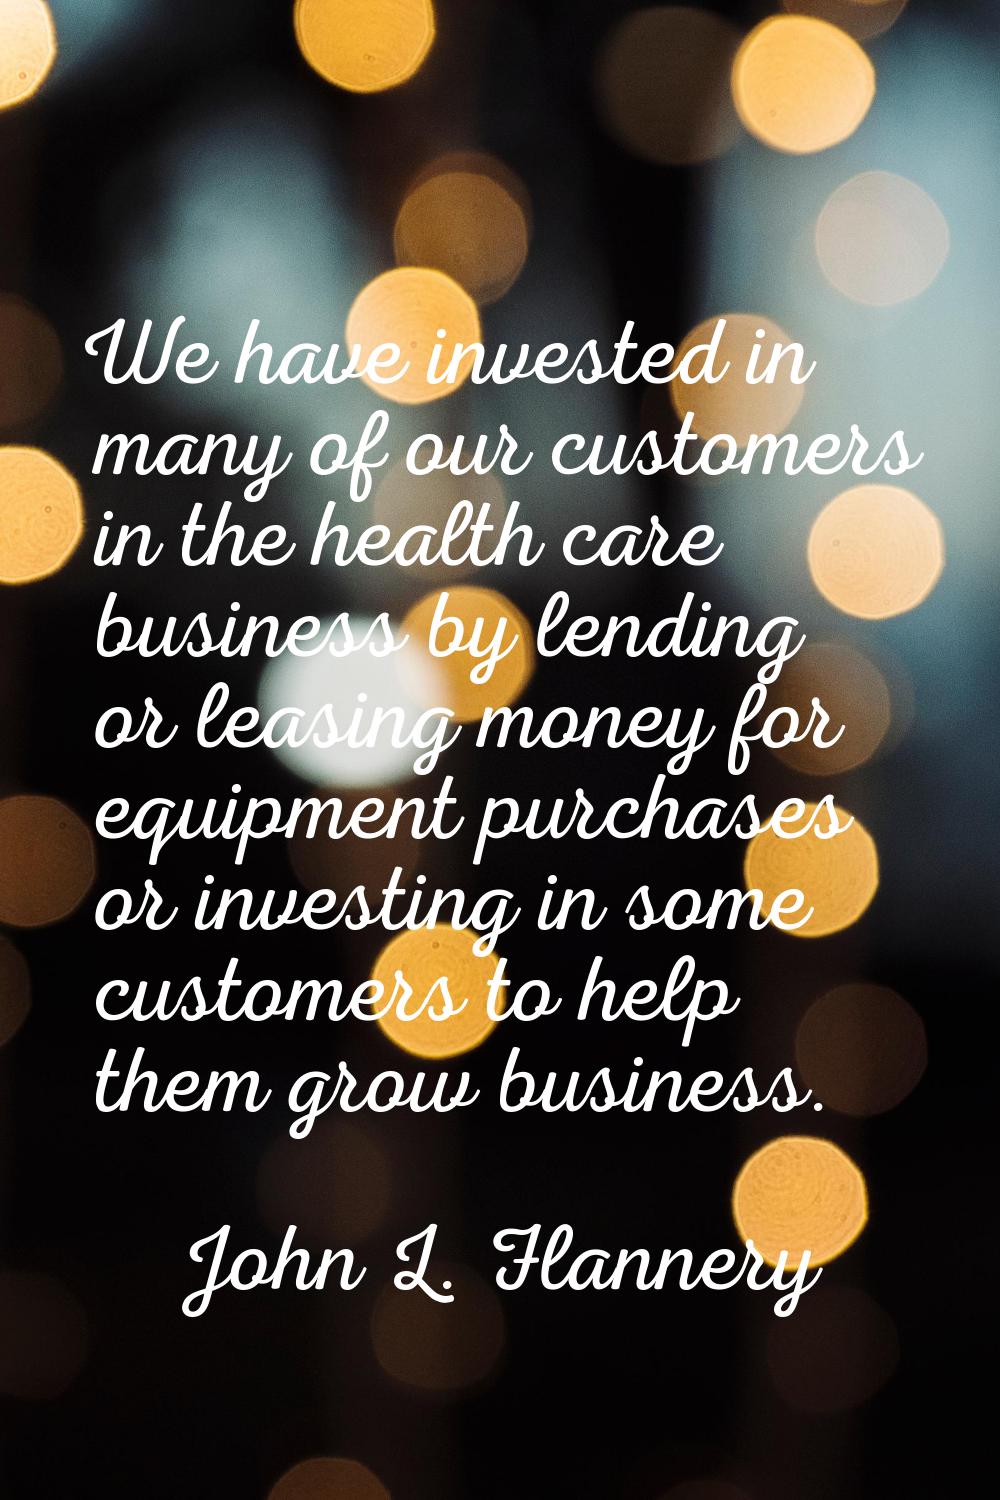 We have invested in many of our customers in the health care business by lending or leasing money f